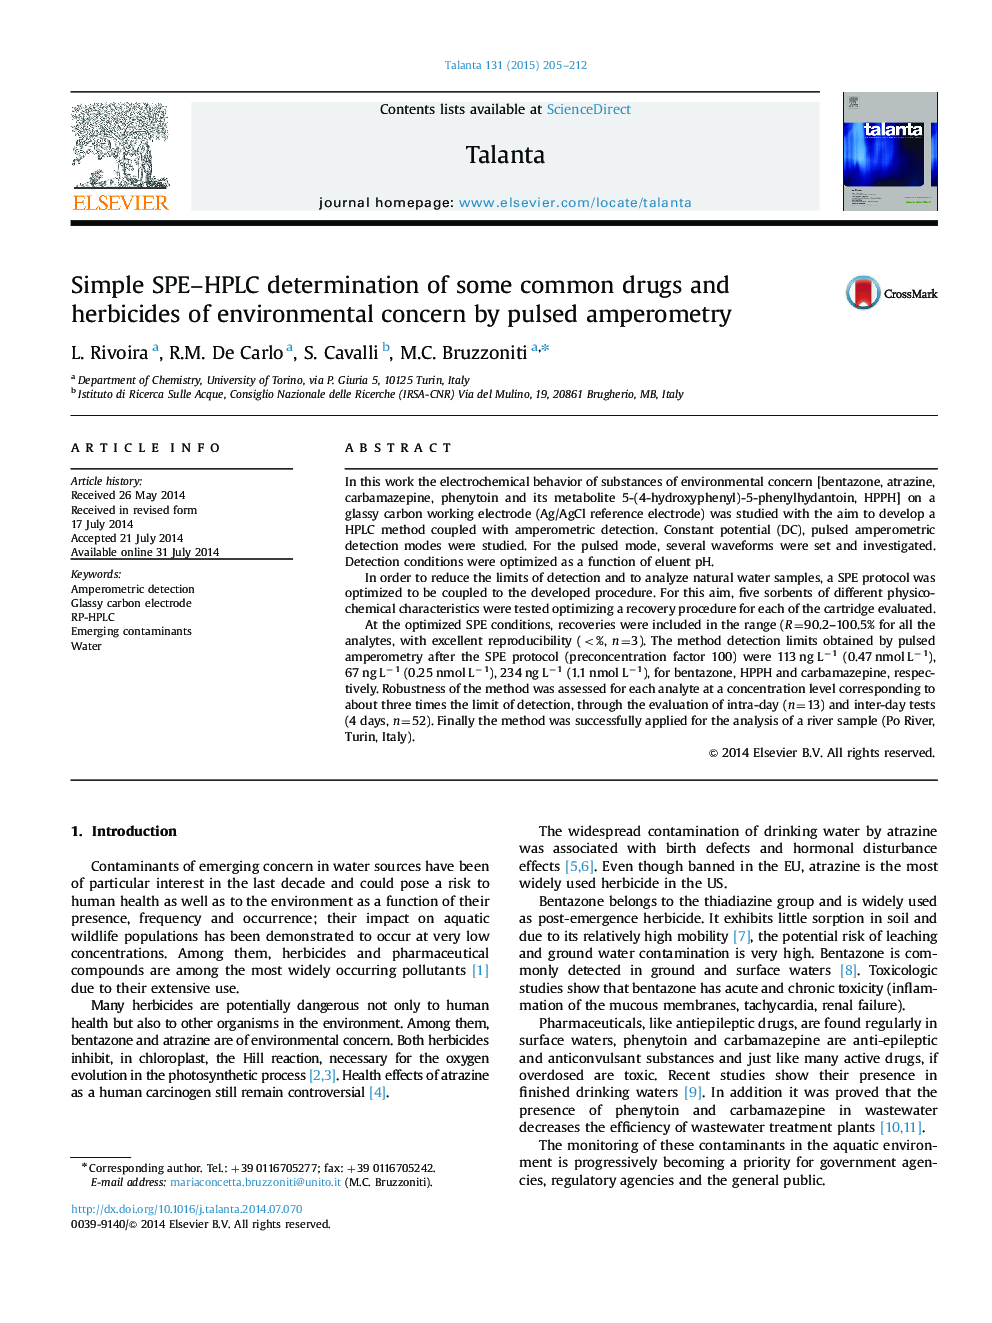 Simple SPE-HPLC determination of some common drugs and herbicides of environmental concern by pulsed amperometry